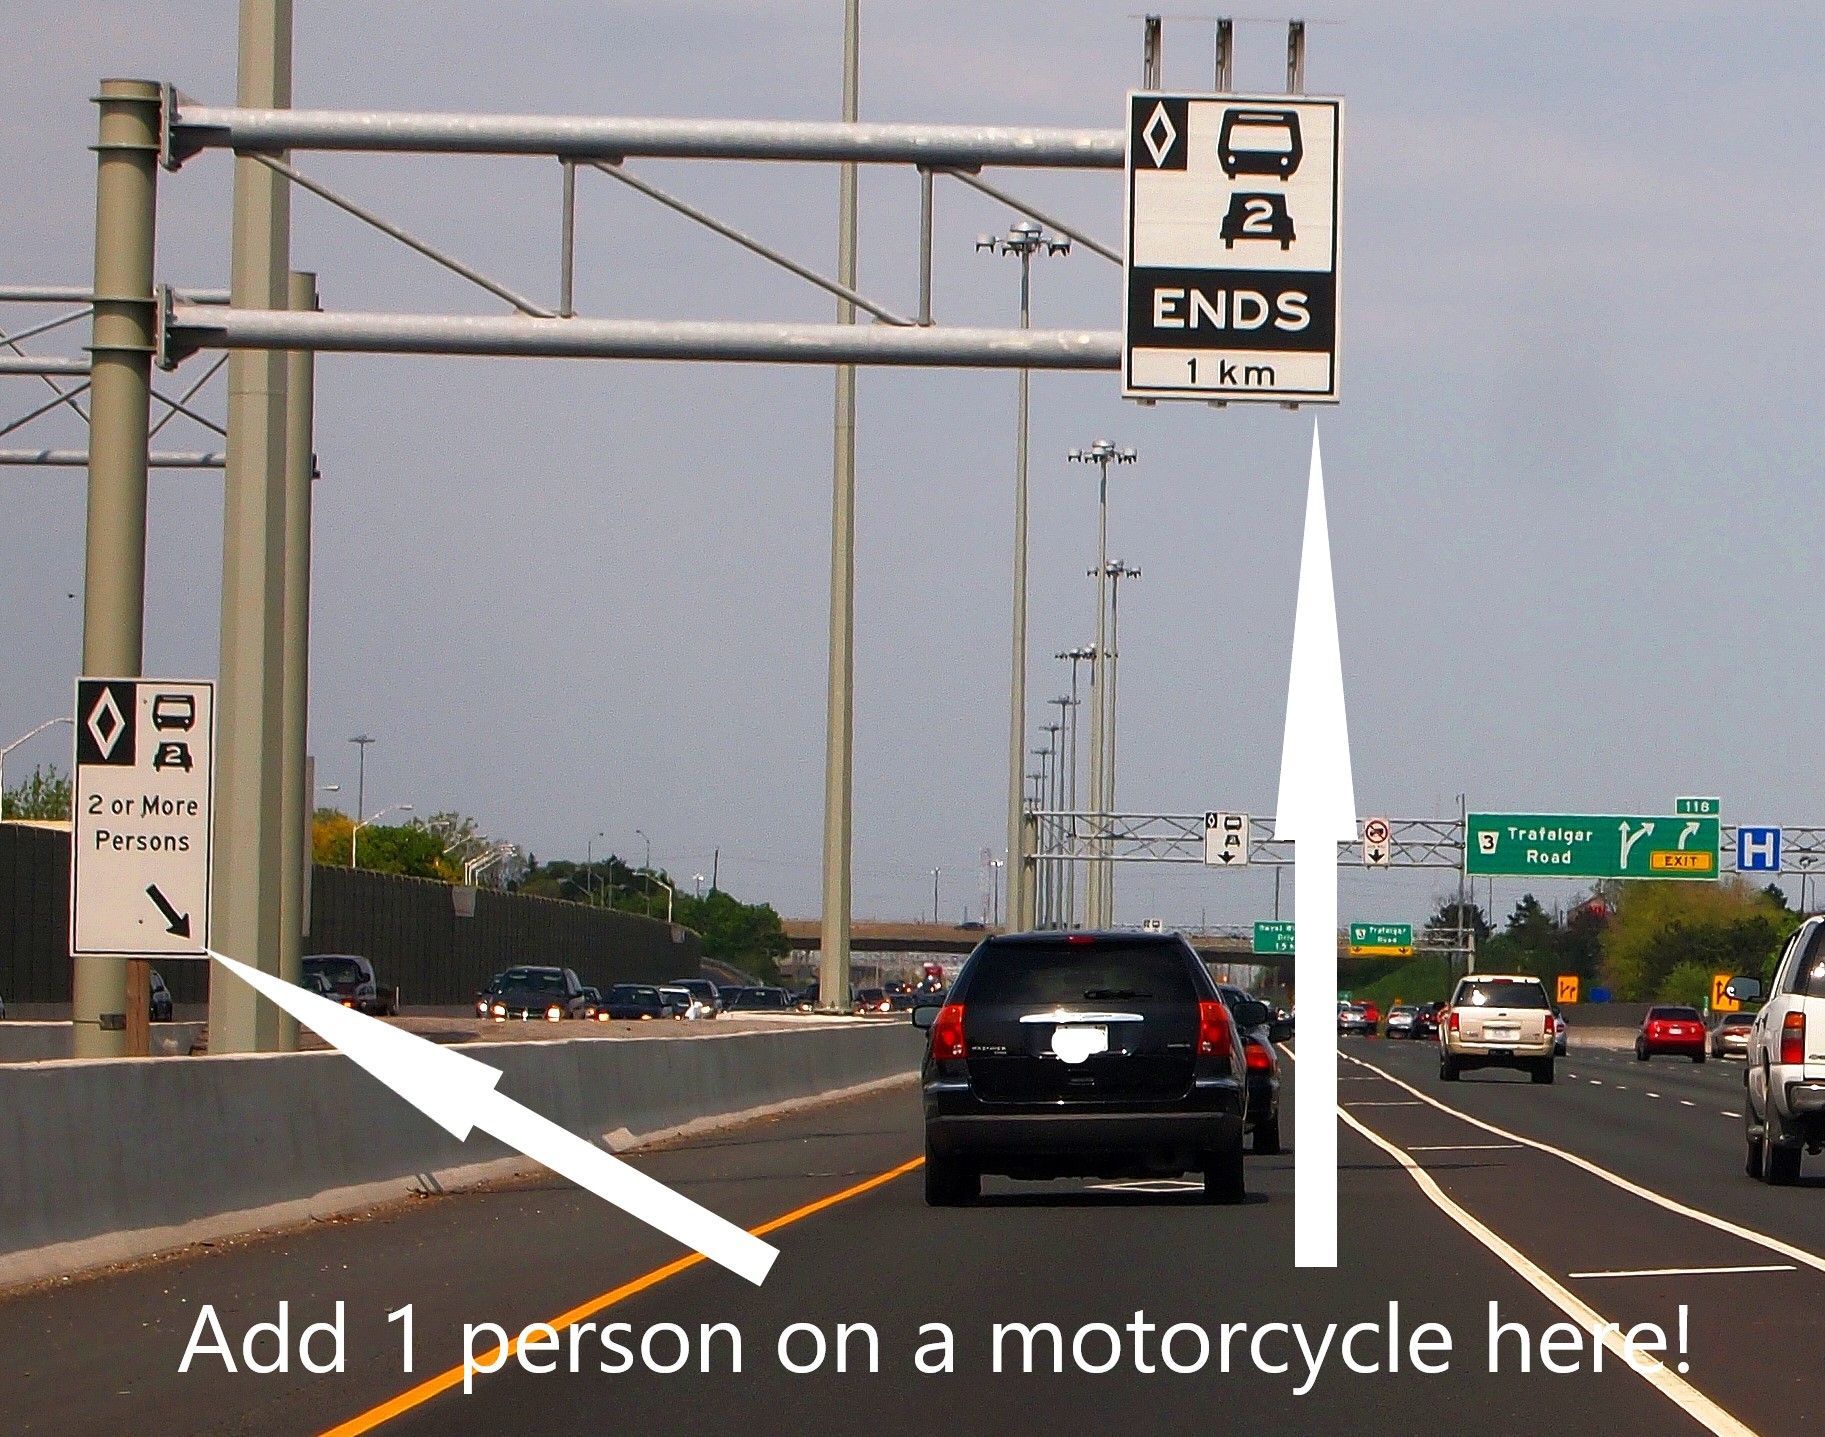 As of June 14, 2019, HOV lanes in Ontario are now legal for single passenger motorcycle riders to use!